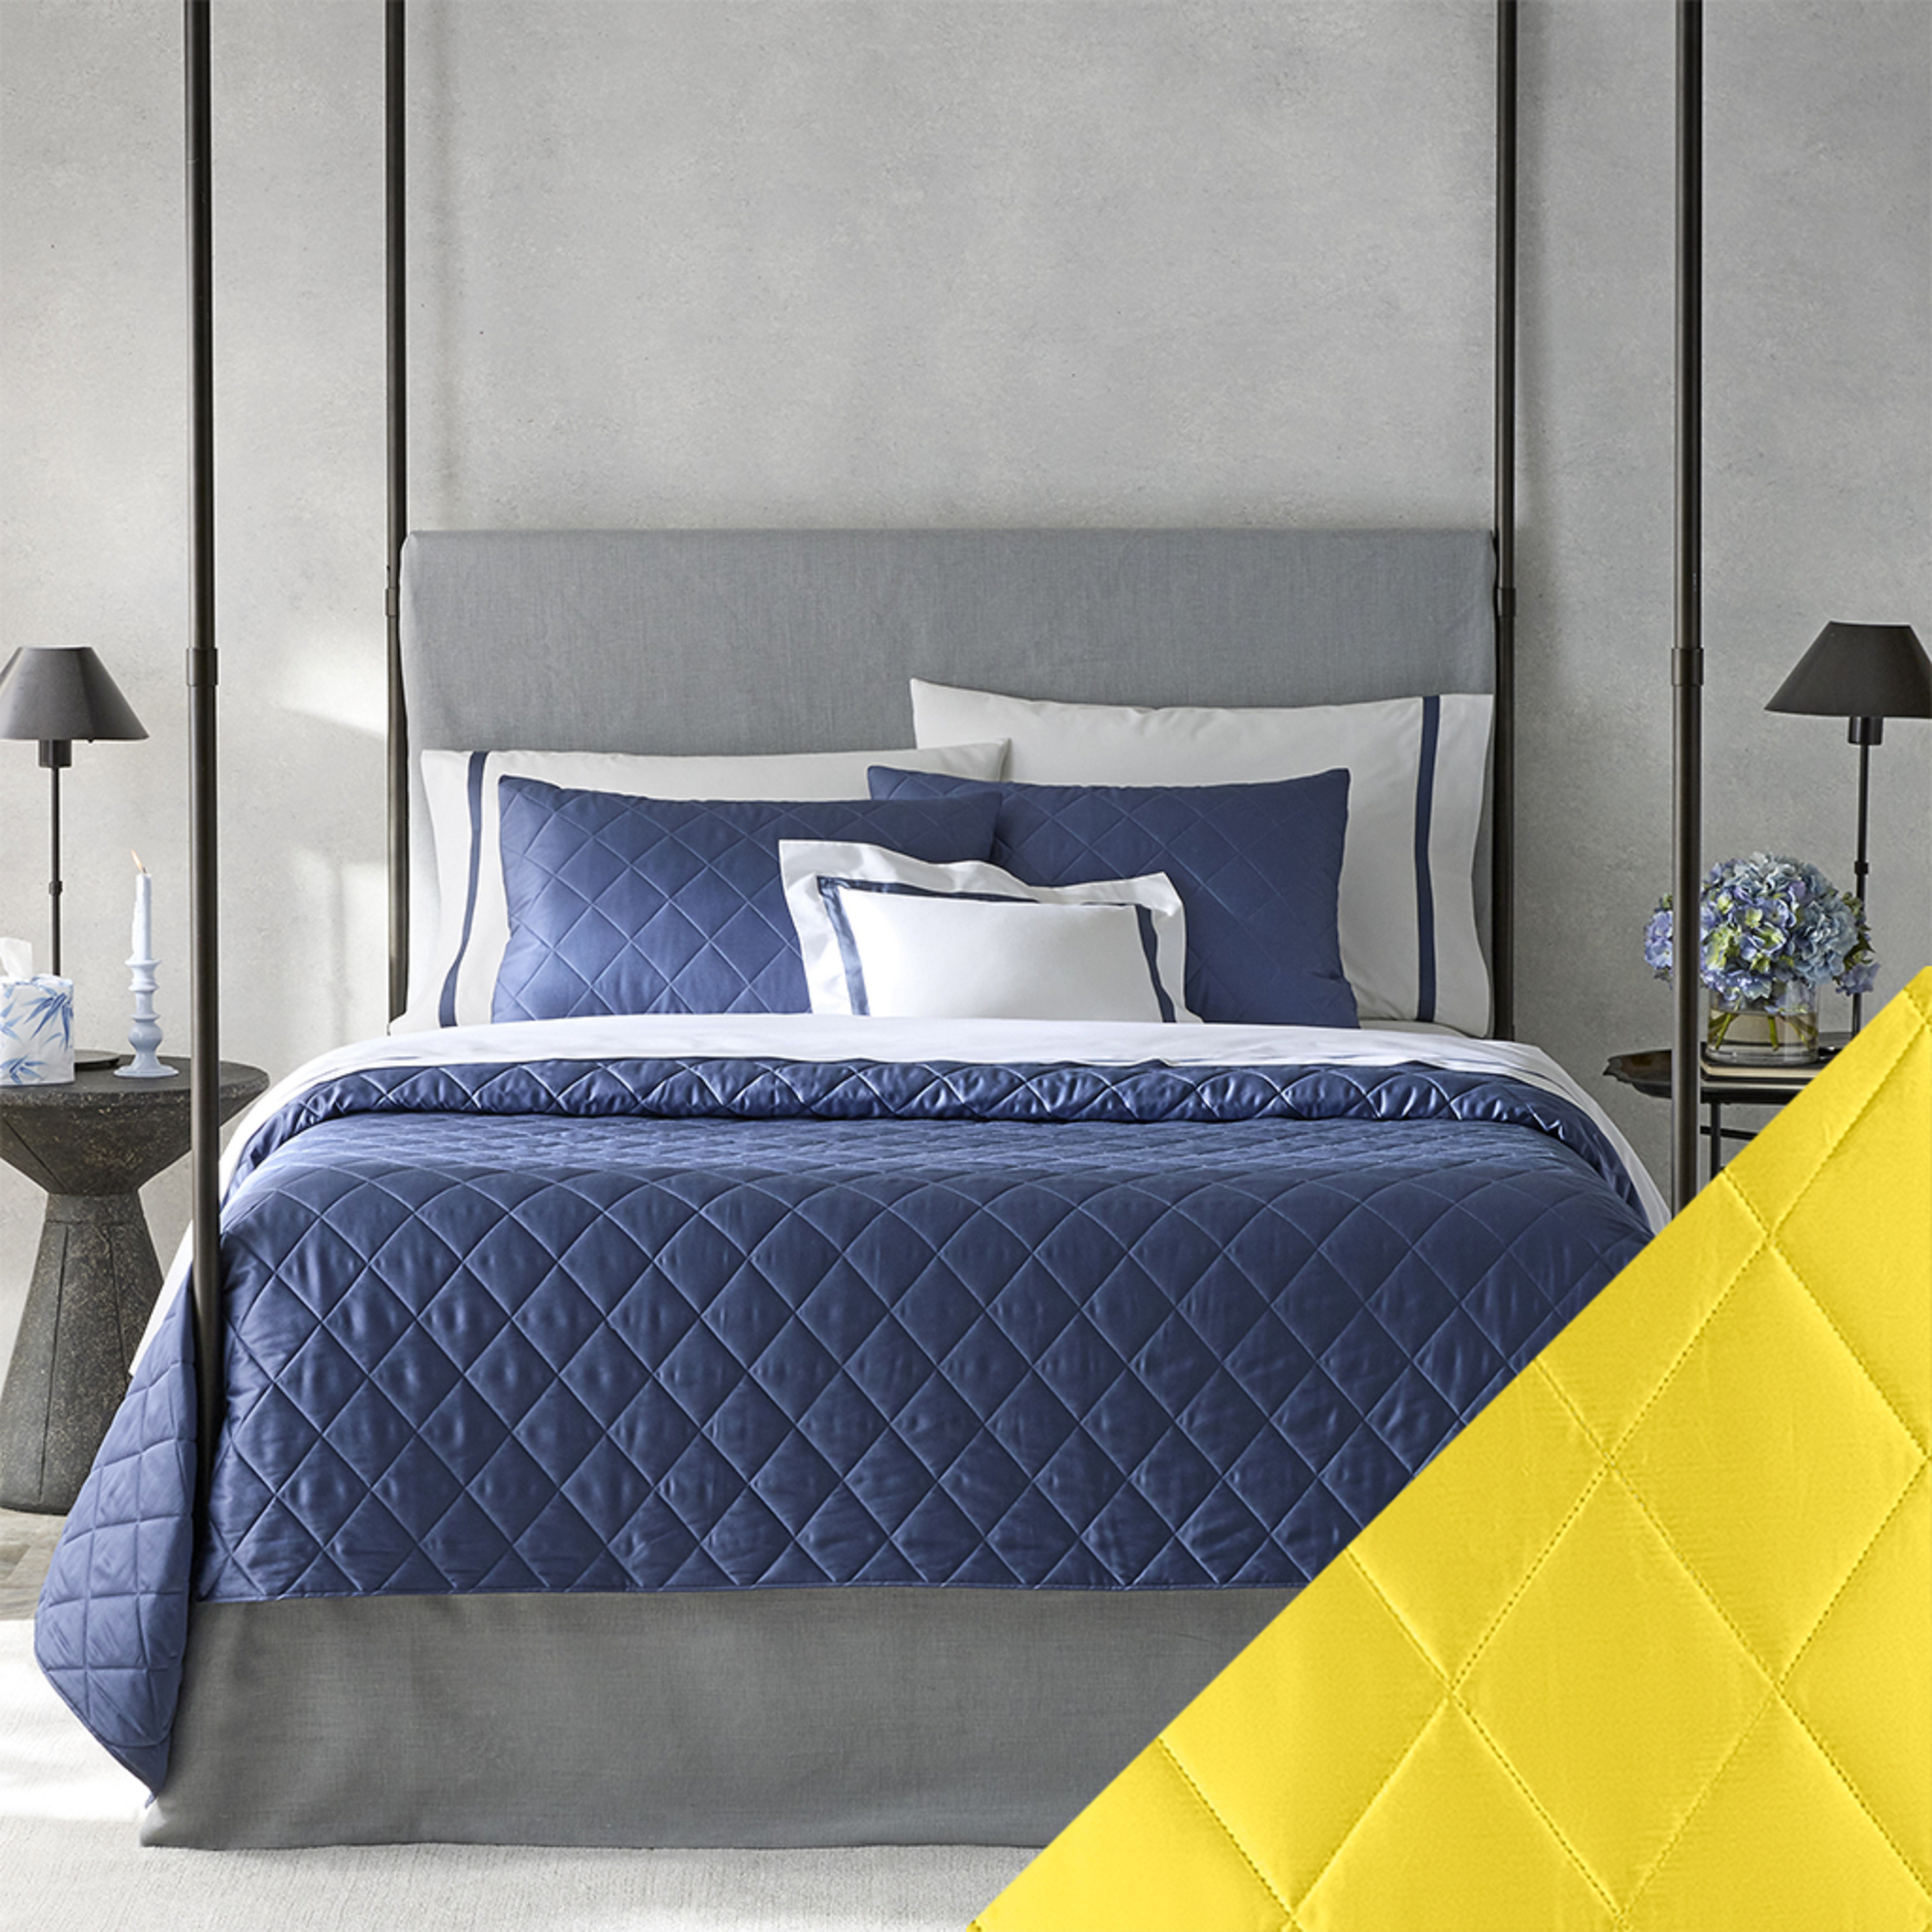 Matouk Nocturne Bedding Main Image with Swatch in Lemon